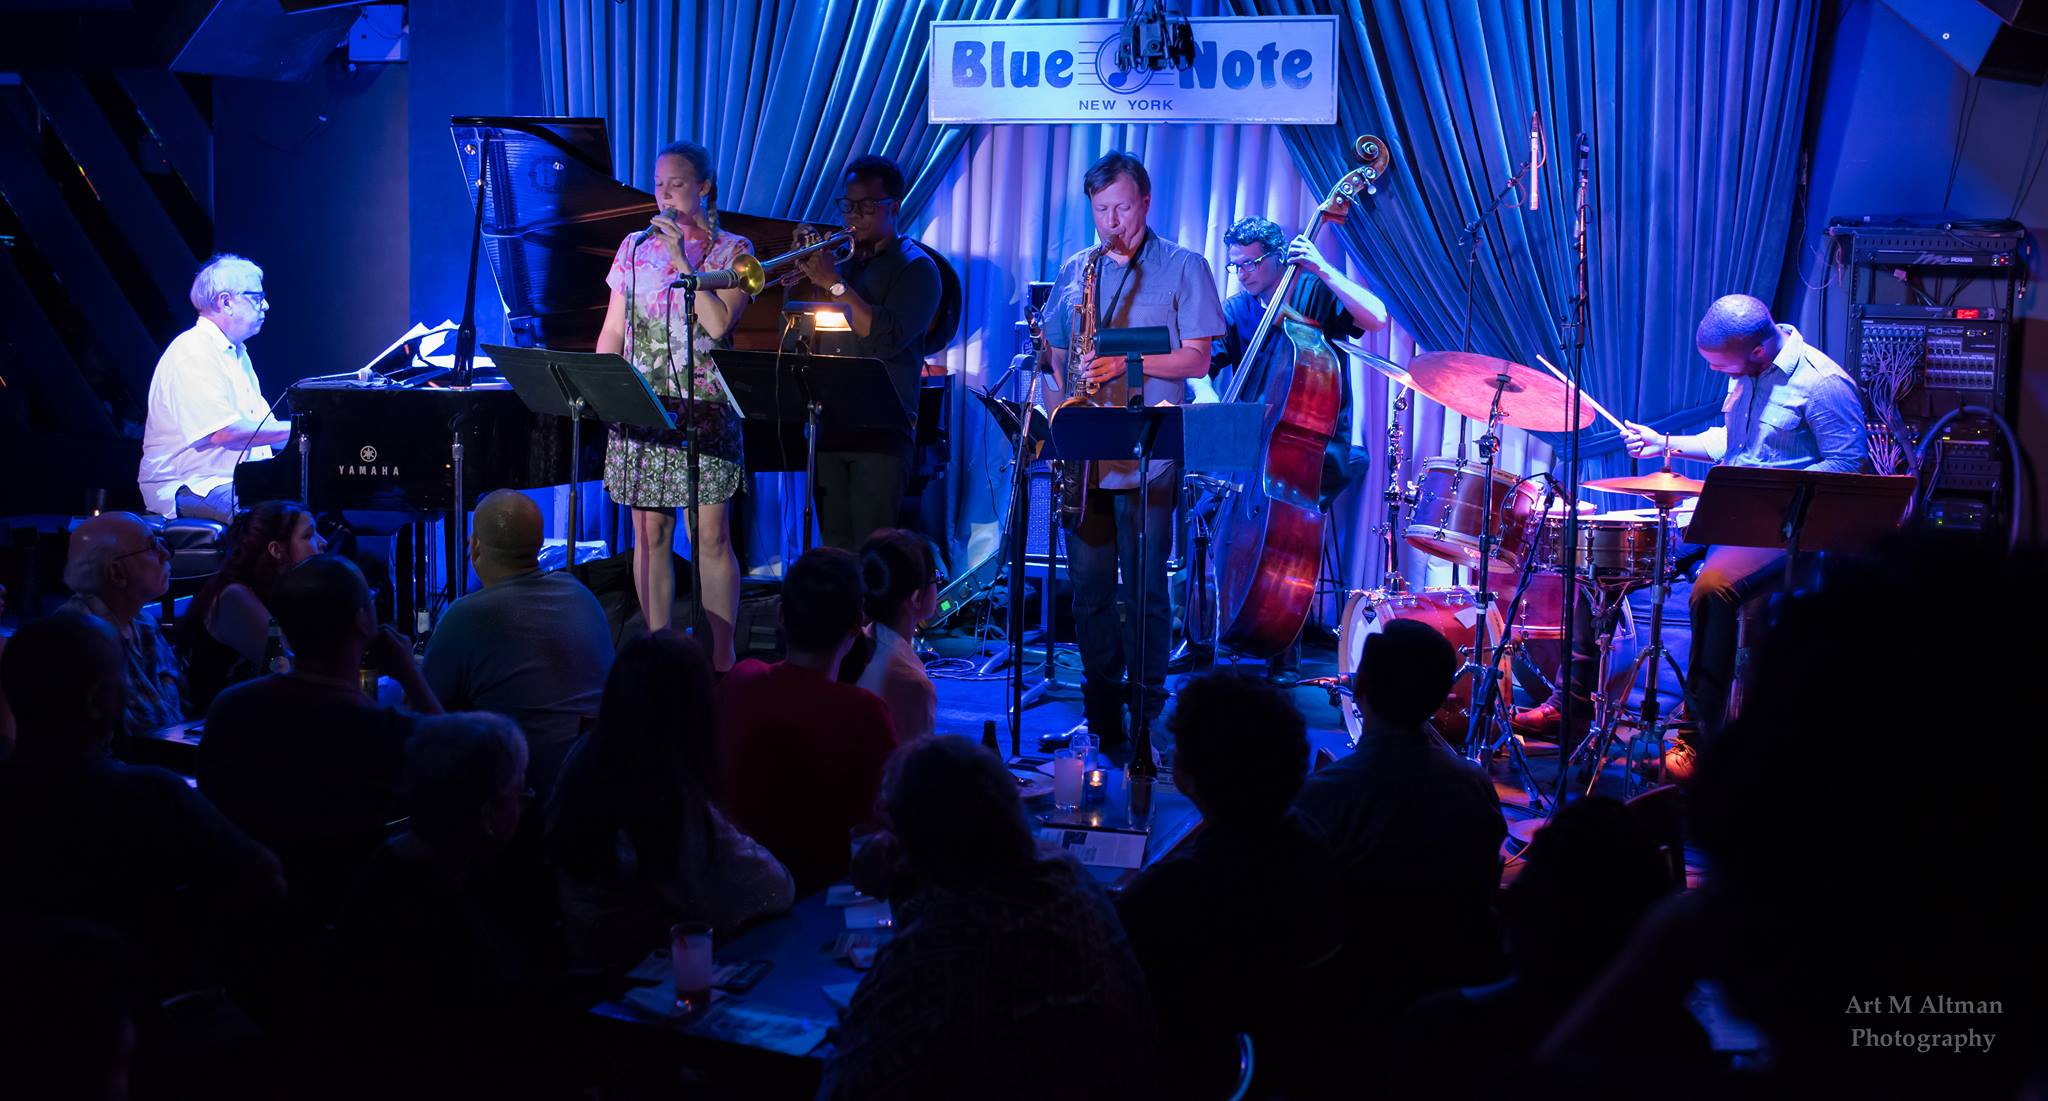 Singing at the Blue Note